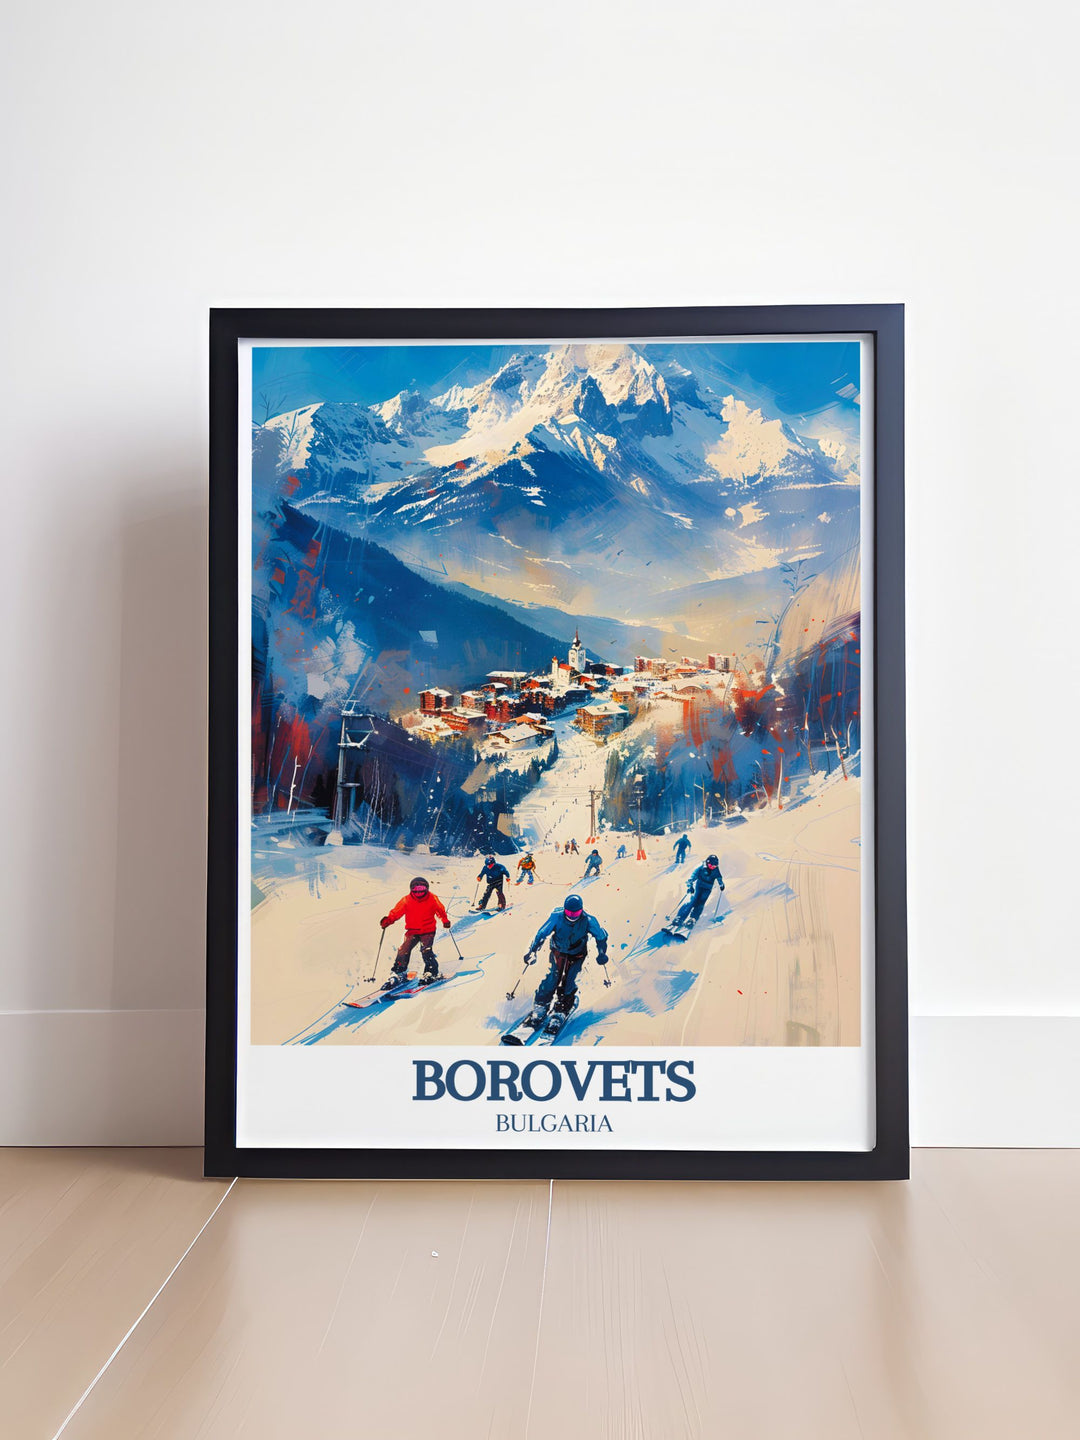 High quality print of Borovets modern ski amenities and the rugged terrain of Musala Peak, capturing the essence of Bulgarias premier alpine destination. Ideal for art lovers who appreciate both adventure and nature.